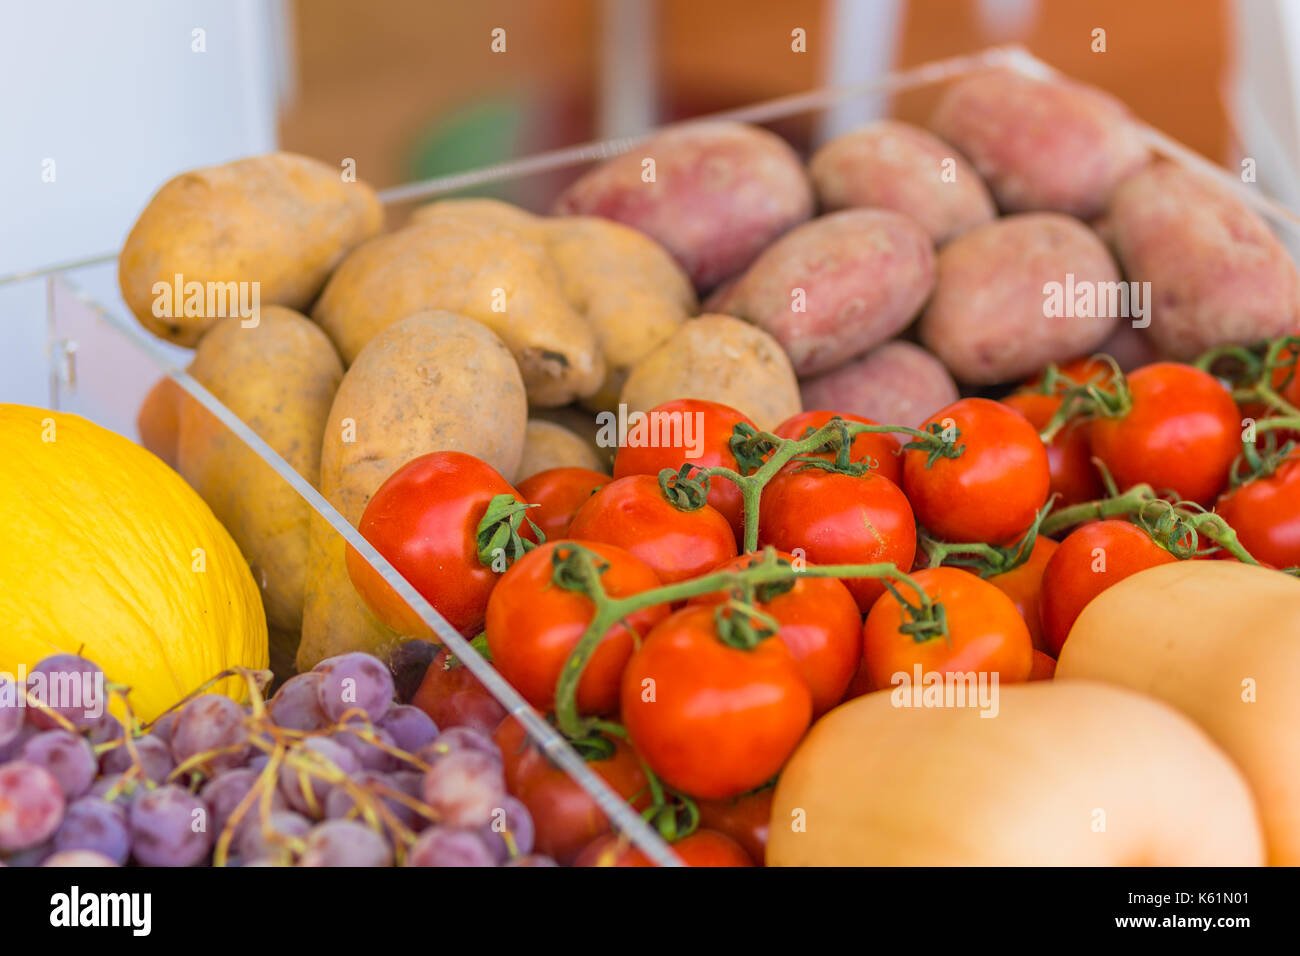 red tomatoes, yellow and red potatoes, black grapes, yellow melons in transparent boxes Stock Photo